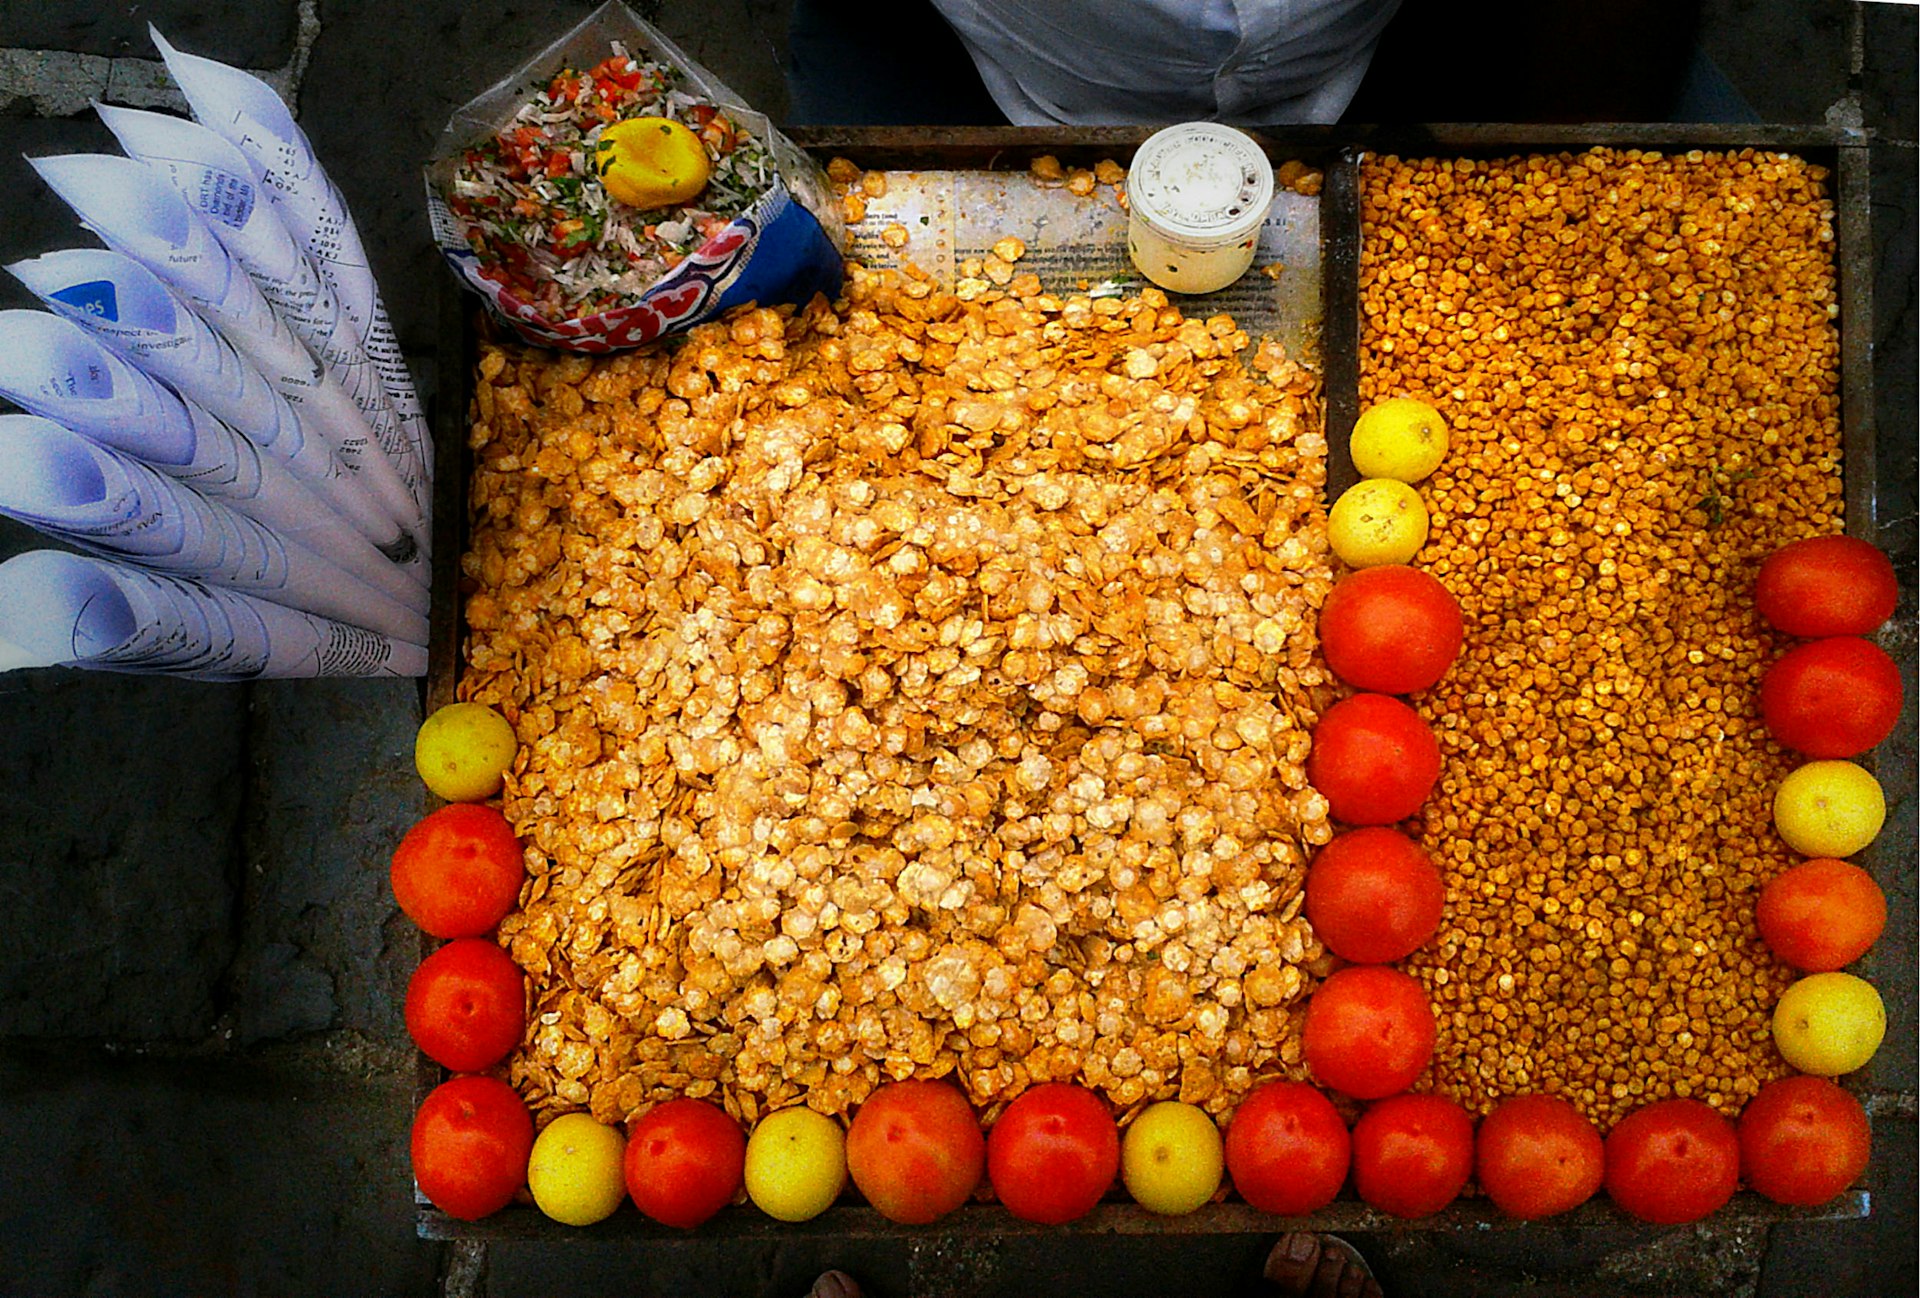 Presentation is everything at a stall selling chana jor garam © Vistas from Soni Rakesh / Getty Images